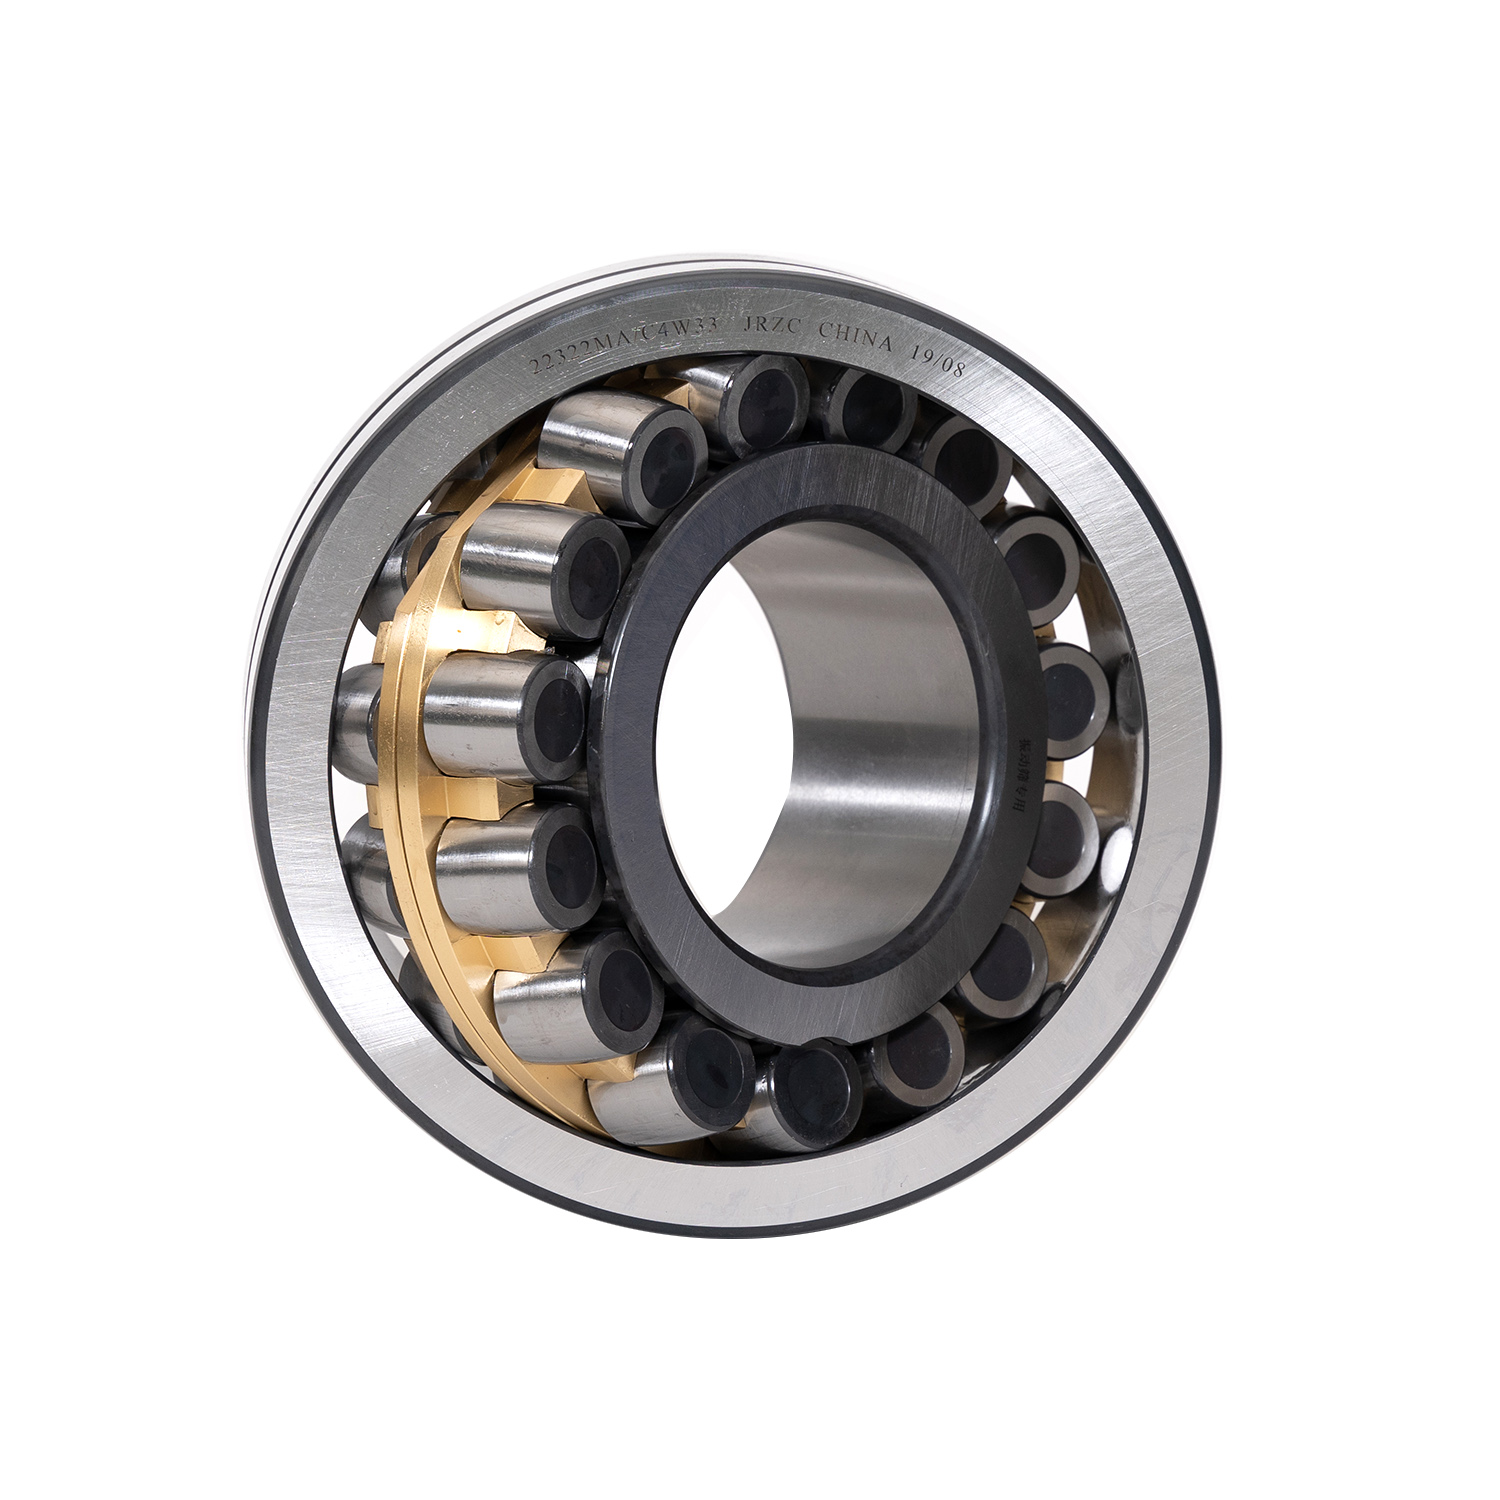 MA Series Of Spherical Roller Bearing For Vibrating Screen